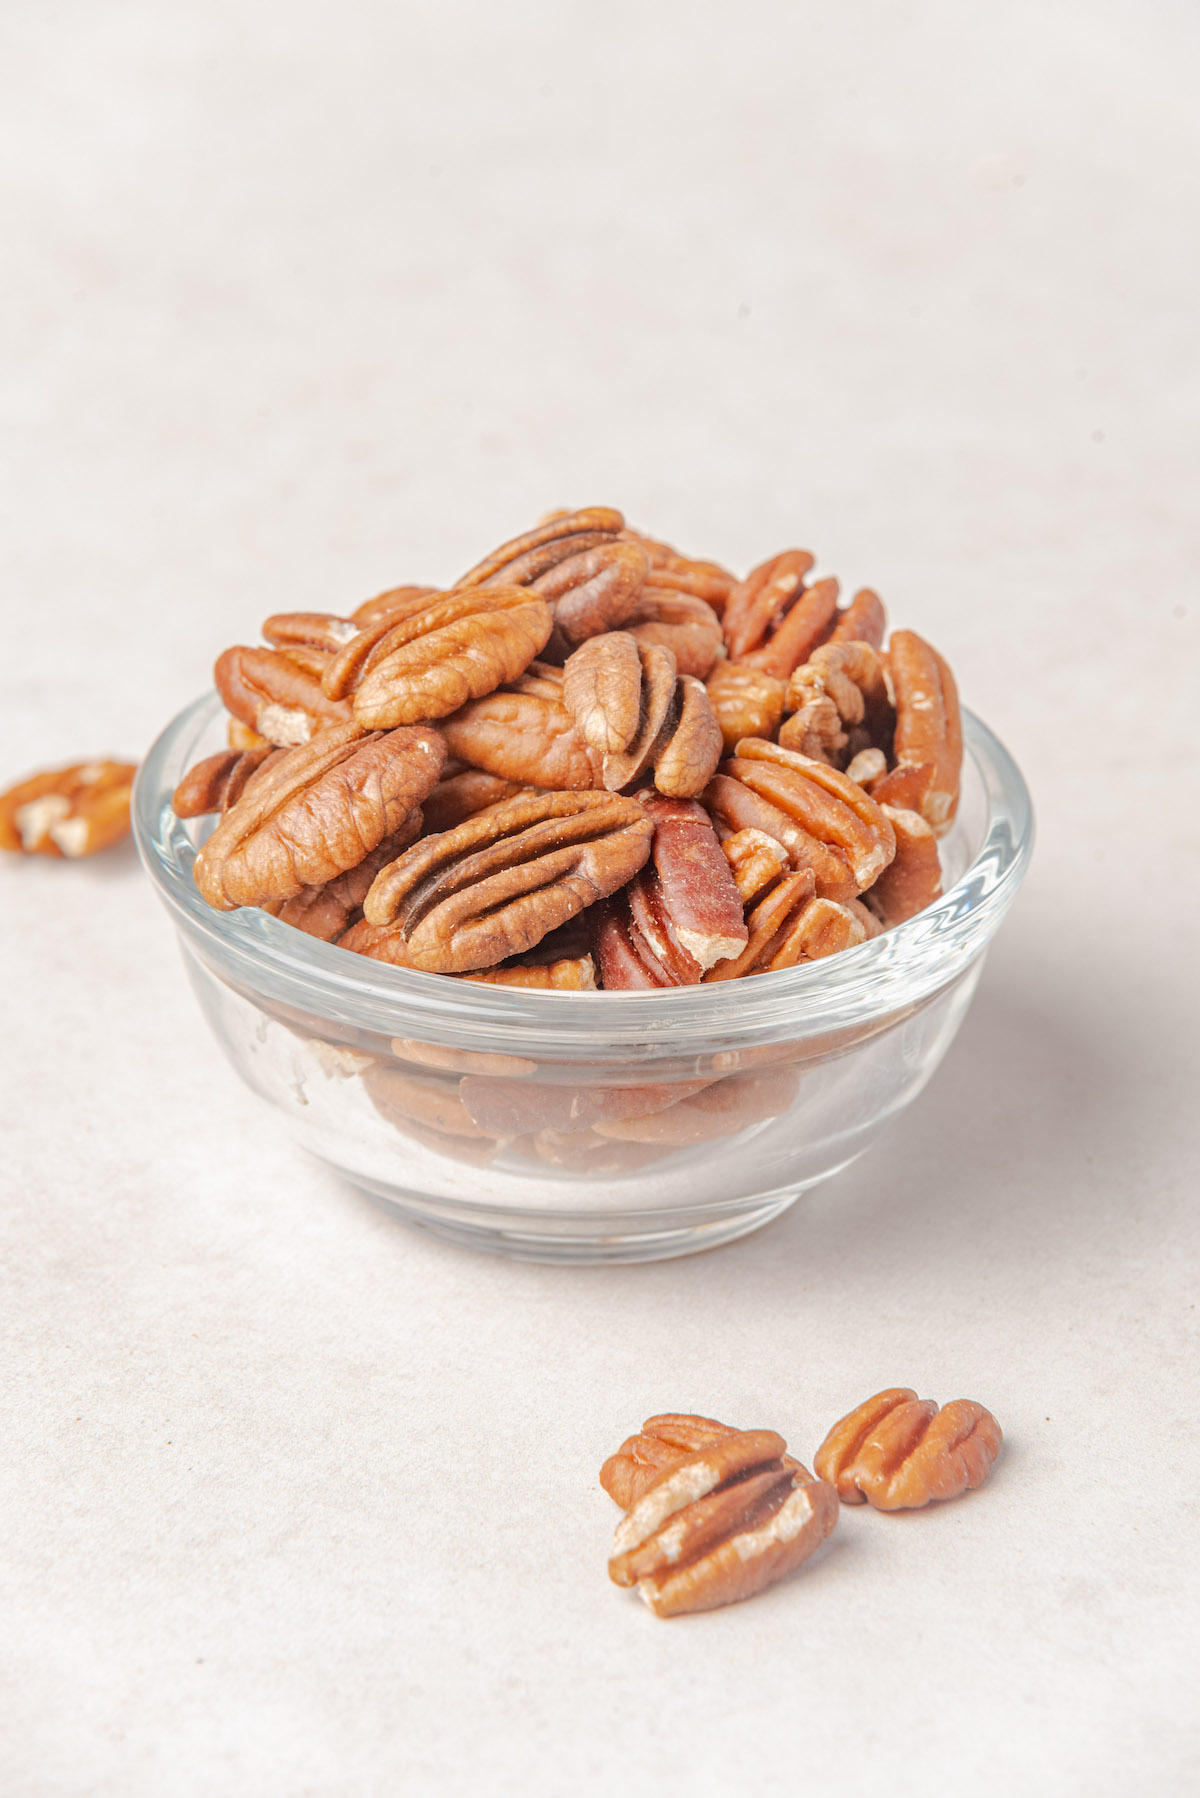 a glass bowl filled with the completed roast pecans